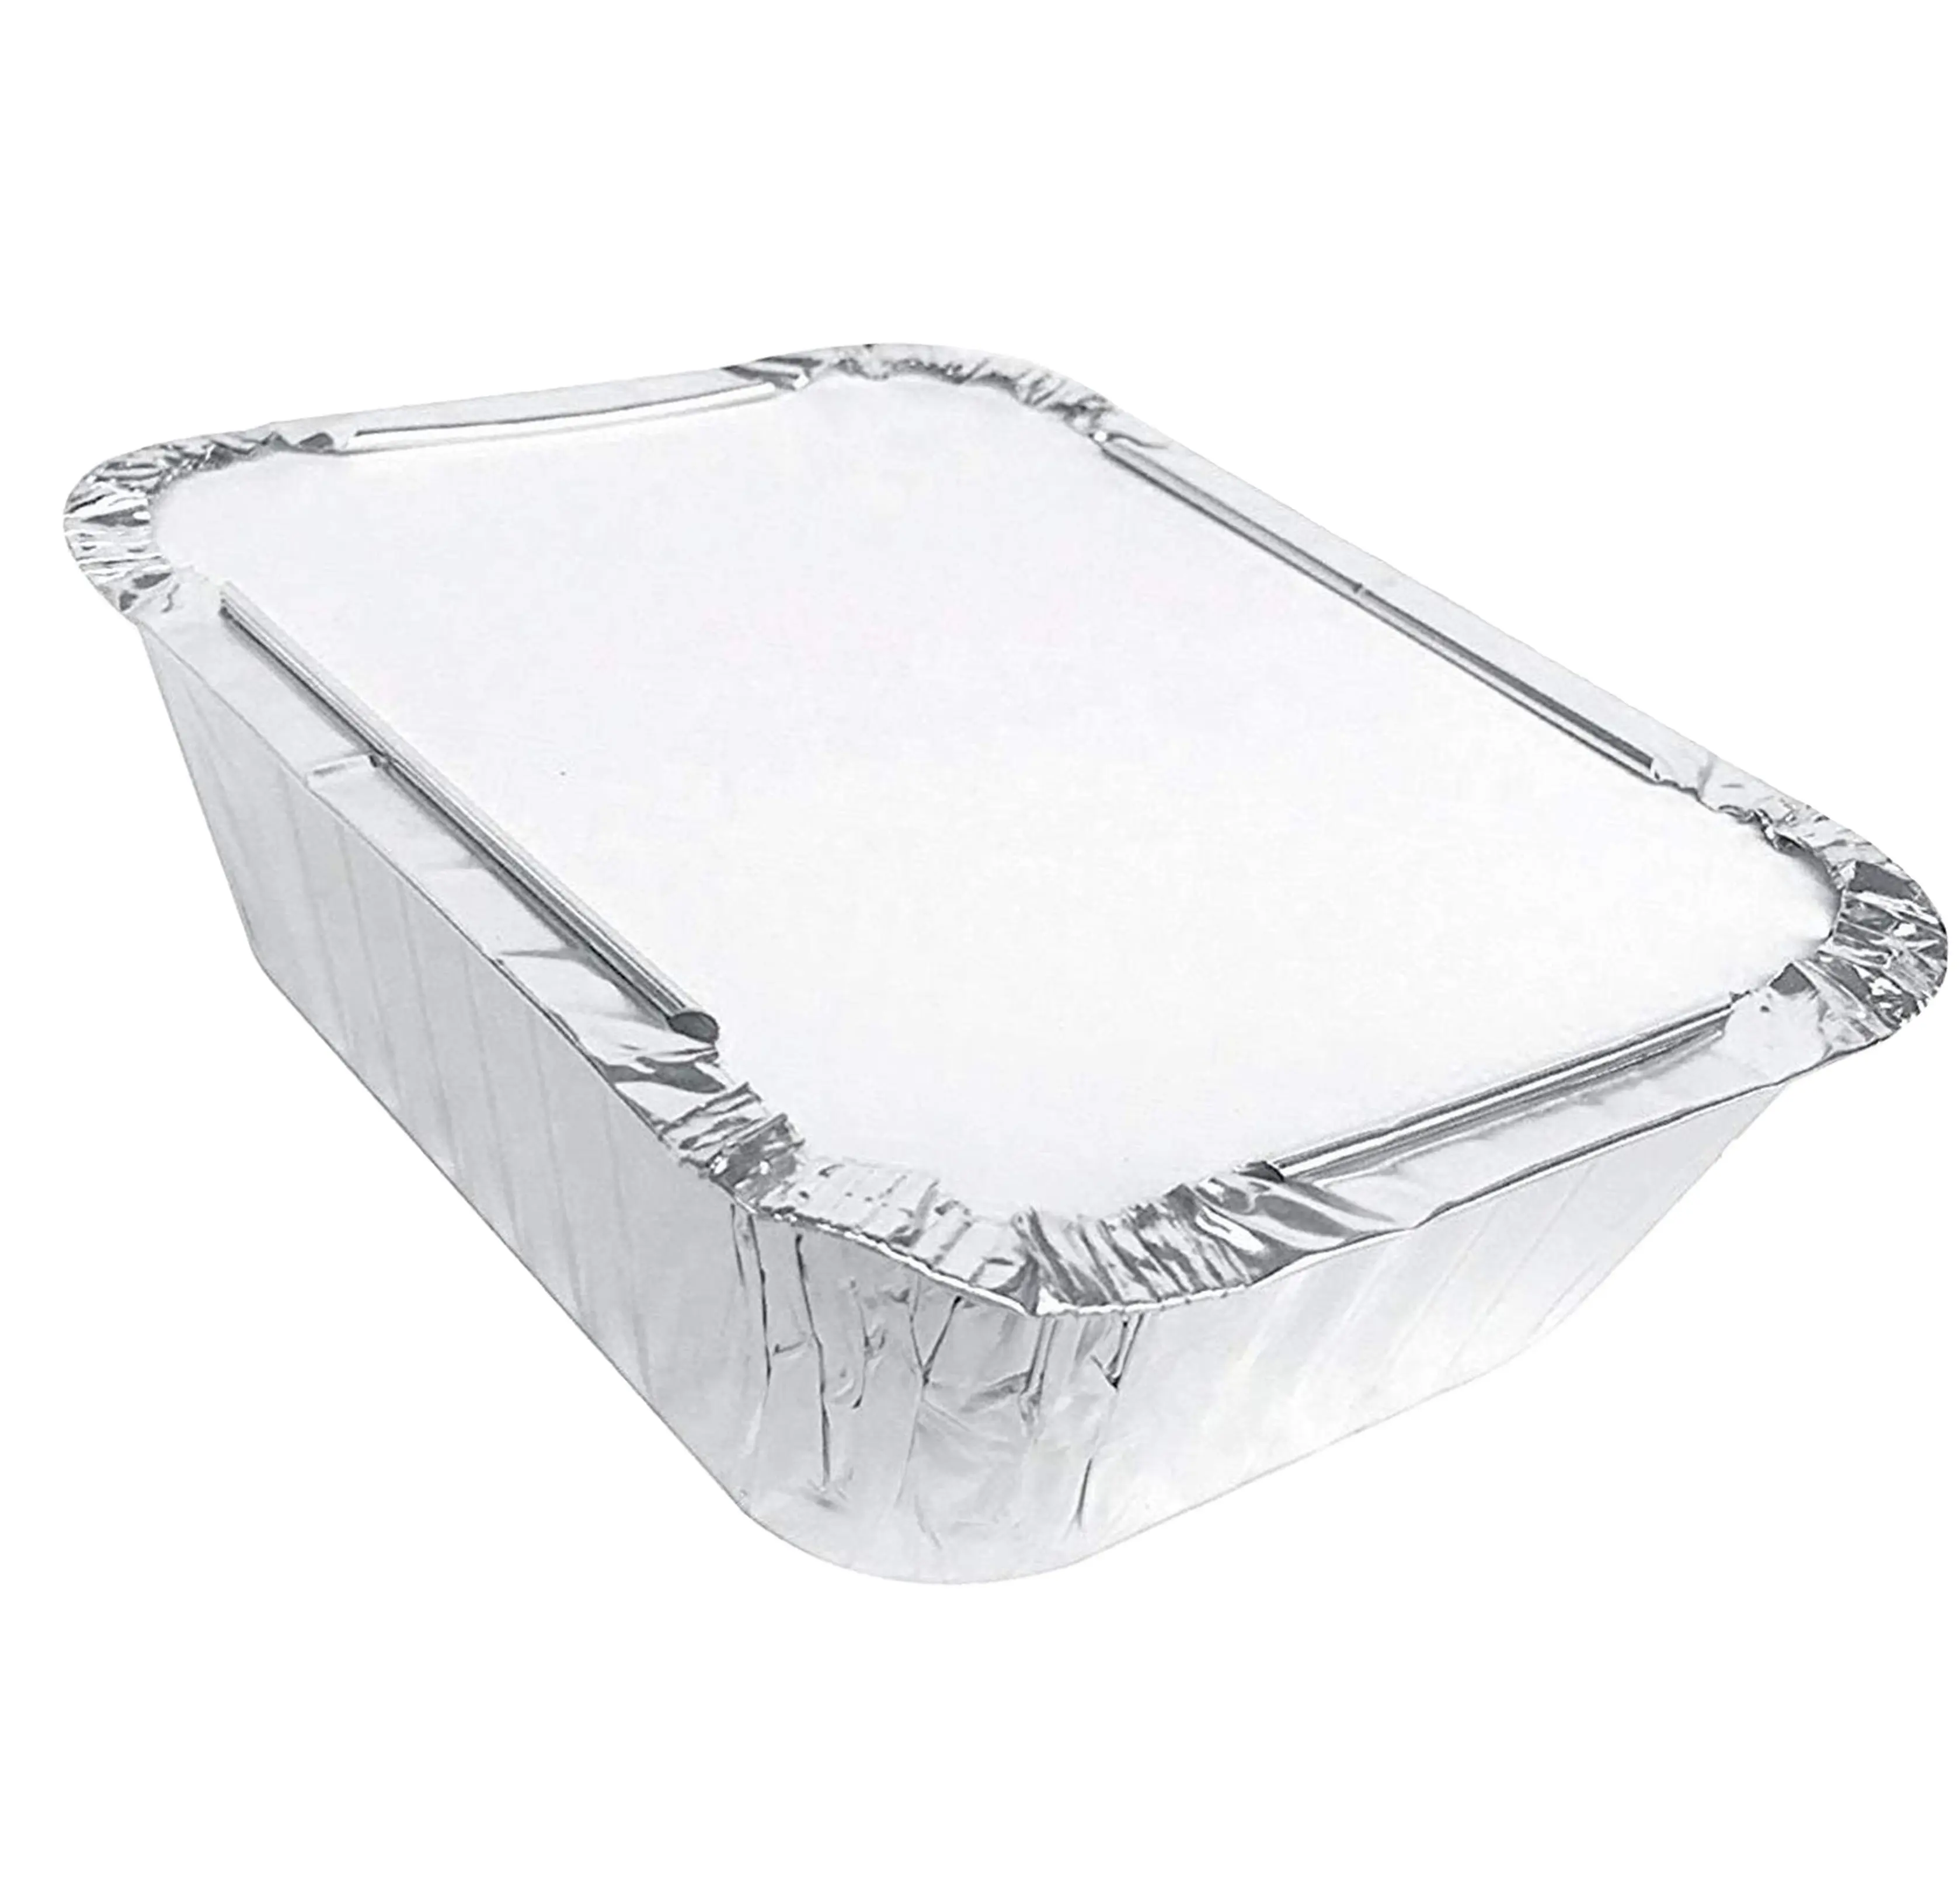 9x13 "30 packs Durable Disposable Half Size Aluminium Foil Pans With Lids Food Containers für Catering, Baking